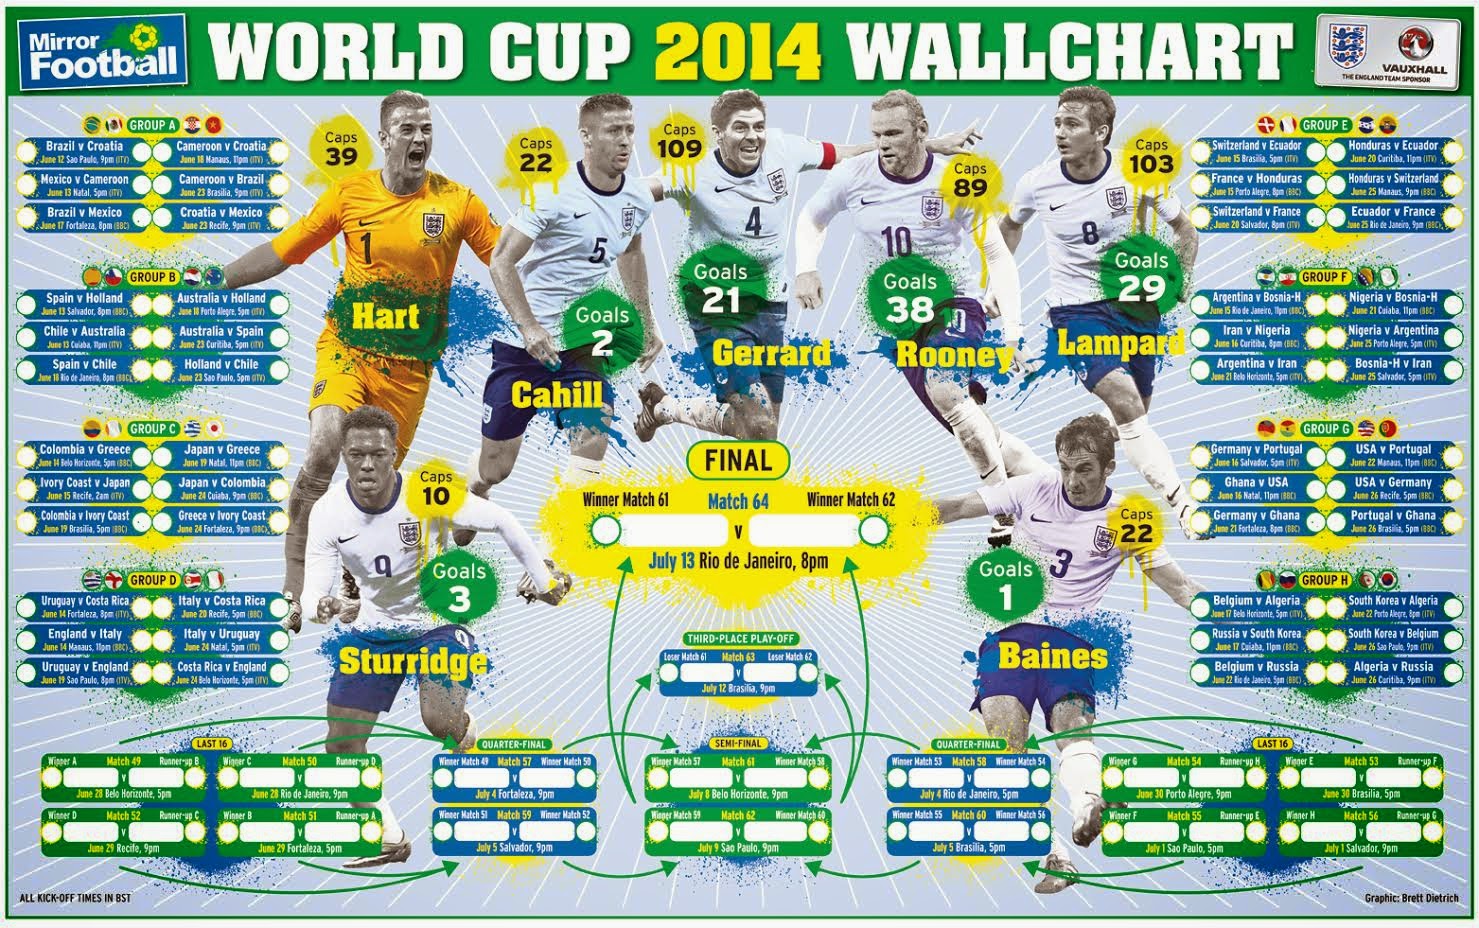 COOGLED Brazil Football World Cup 2014 Time Table Schedule and Venue